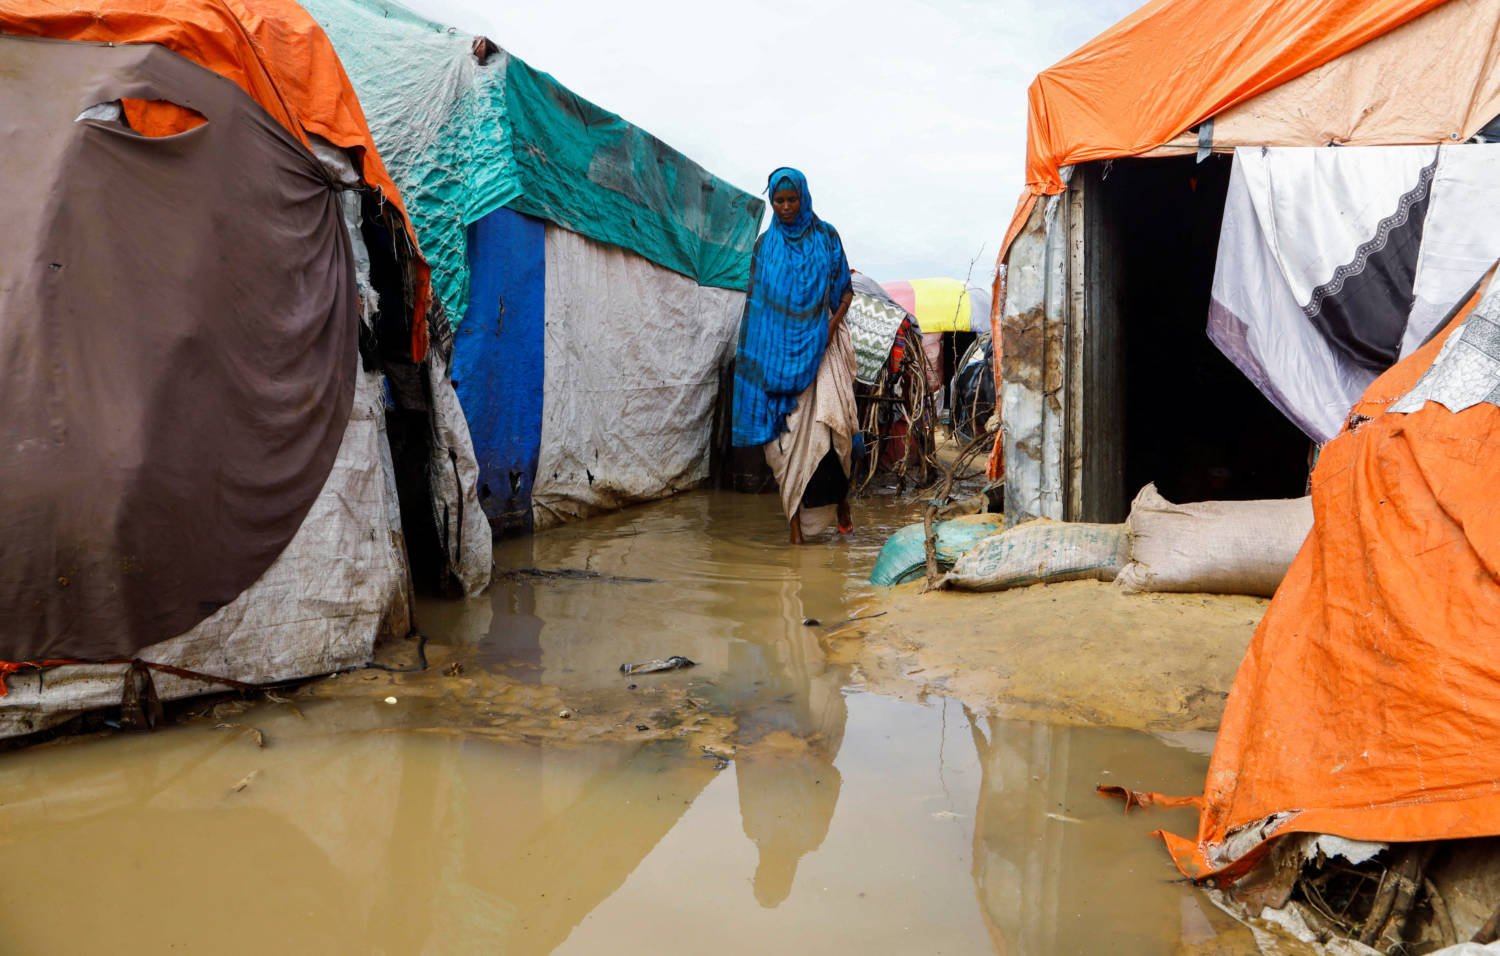 A Somali Woman Walks Within Their Makeshift Shelters At The Al Hidaya Camp For The Internally Displaced People Following Heavy Rains In The Outskirts Of Mogadishu